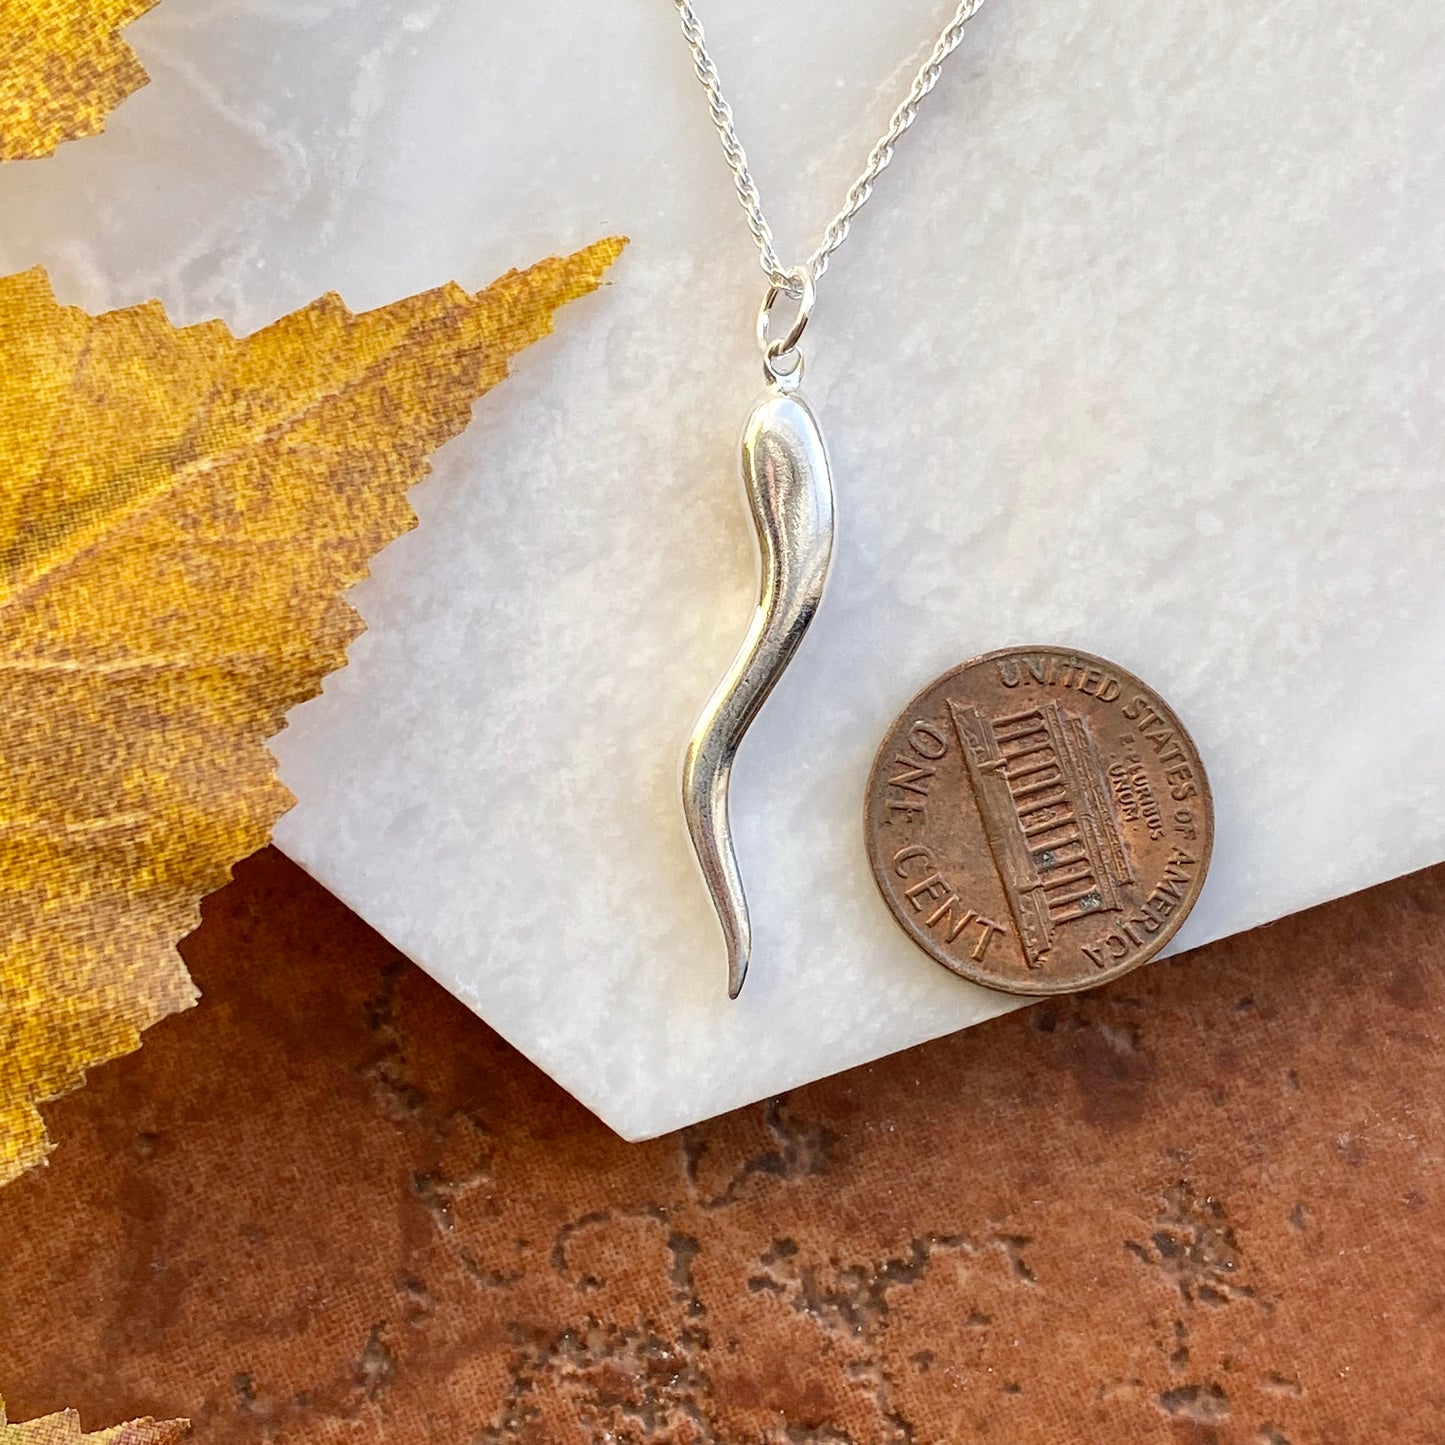 Sterling Silver Large "Cornicello" Italian Horn Pendant Necklace, Sterling Silver Large "Cornicello" Italian Horn Pendant Necklace - Legacy Saint Jewelry